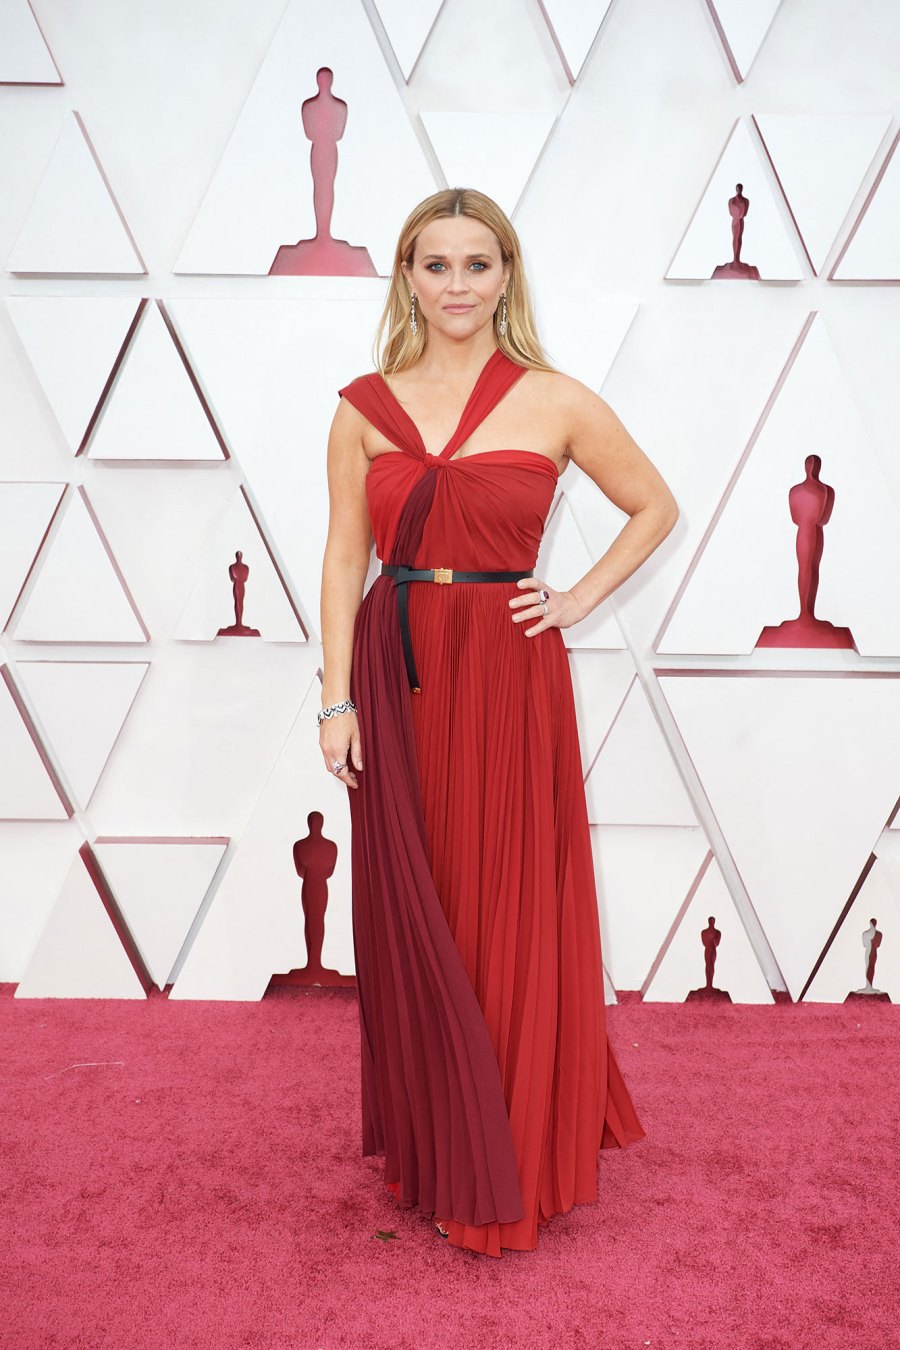 See Reese Witherspoon's Most Glamorous Red Carpet Looks: Photos